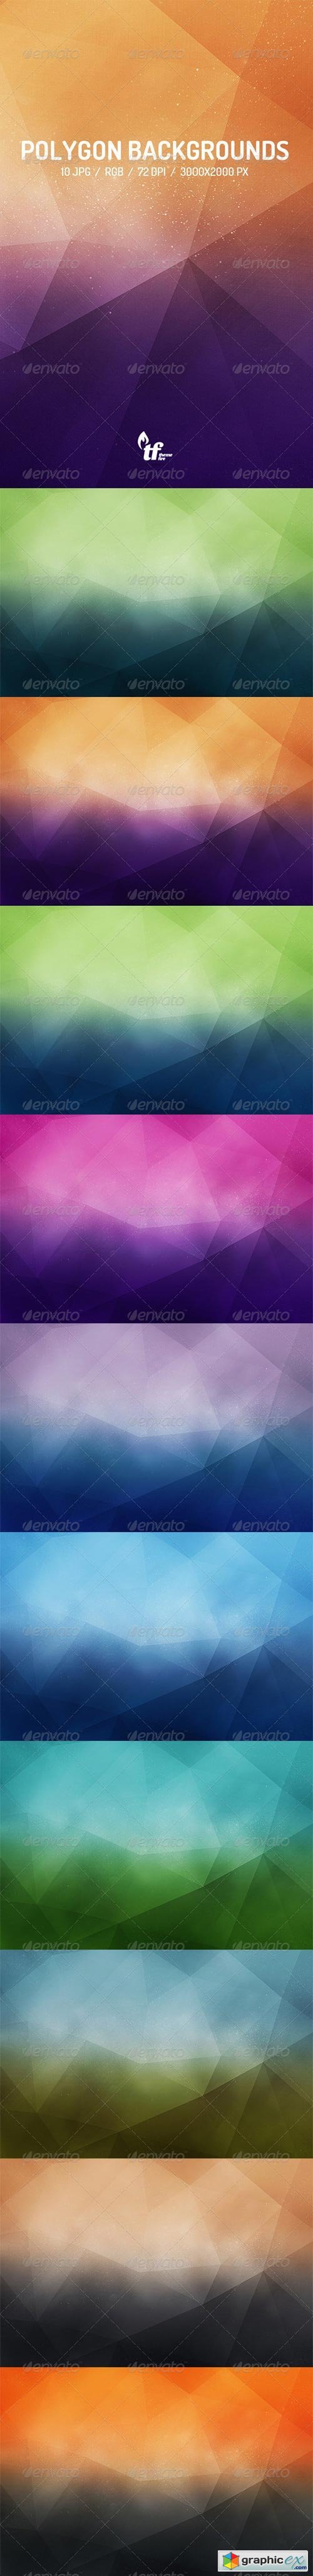 10 Polygon Backgrounds 